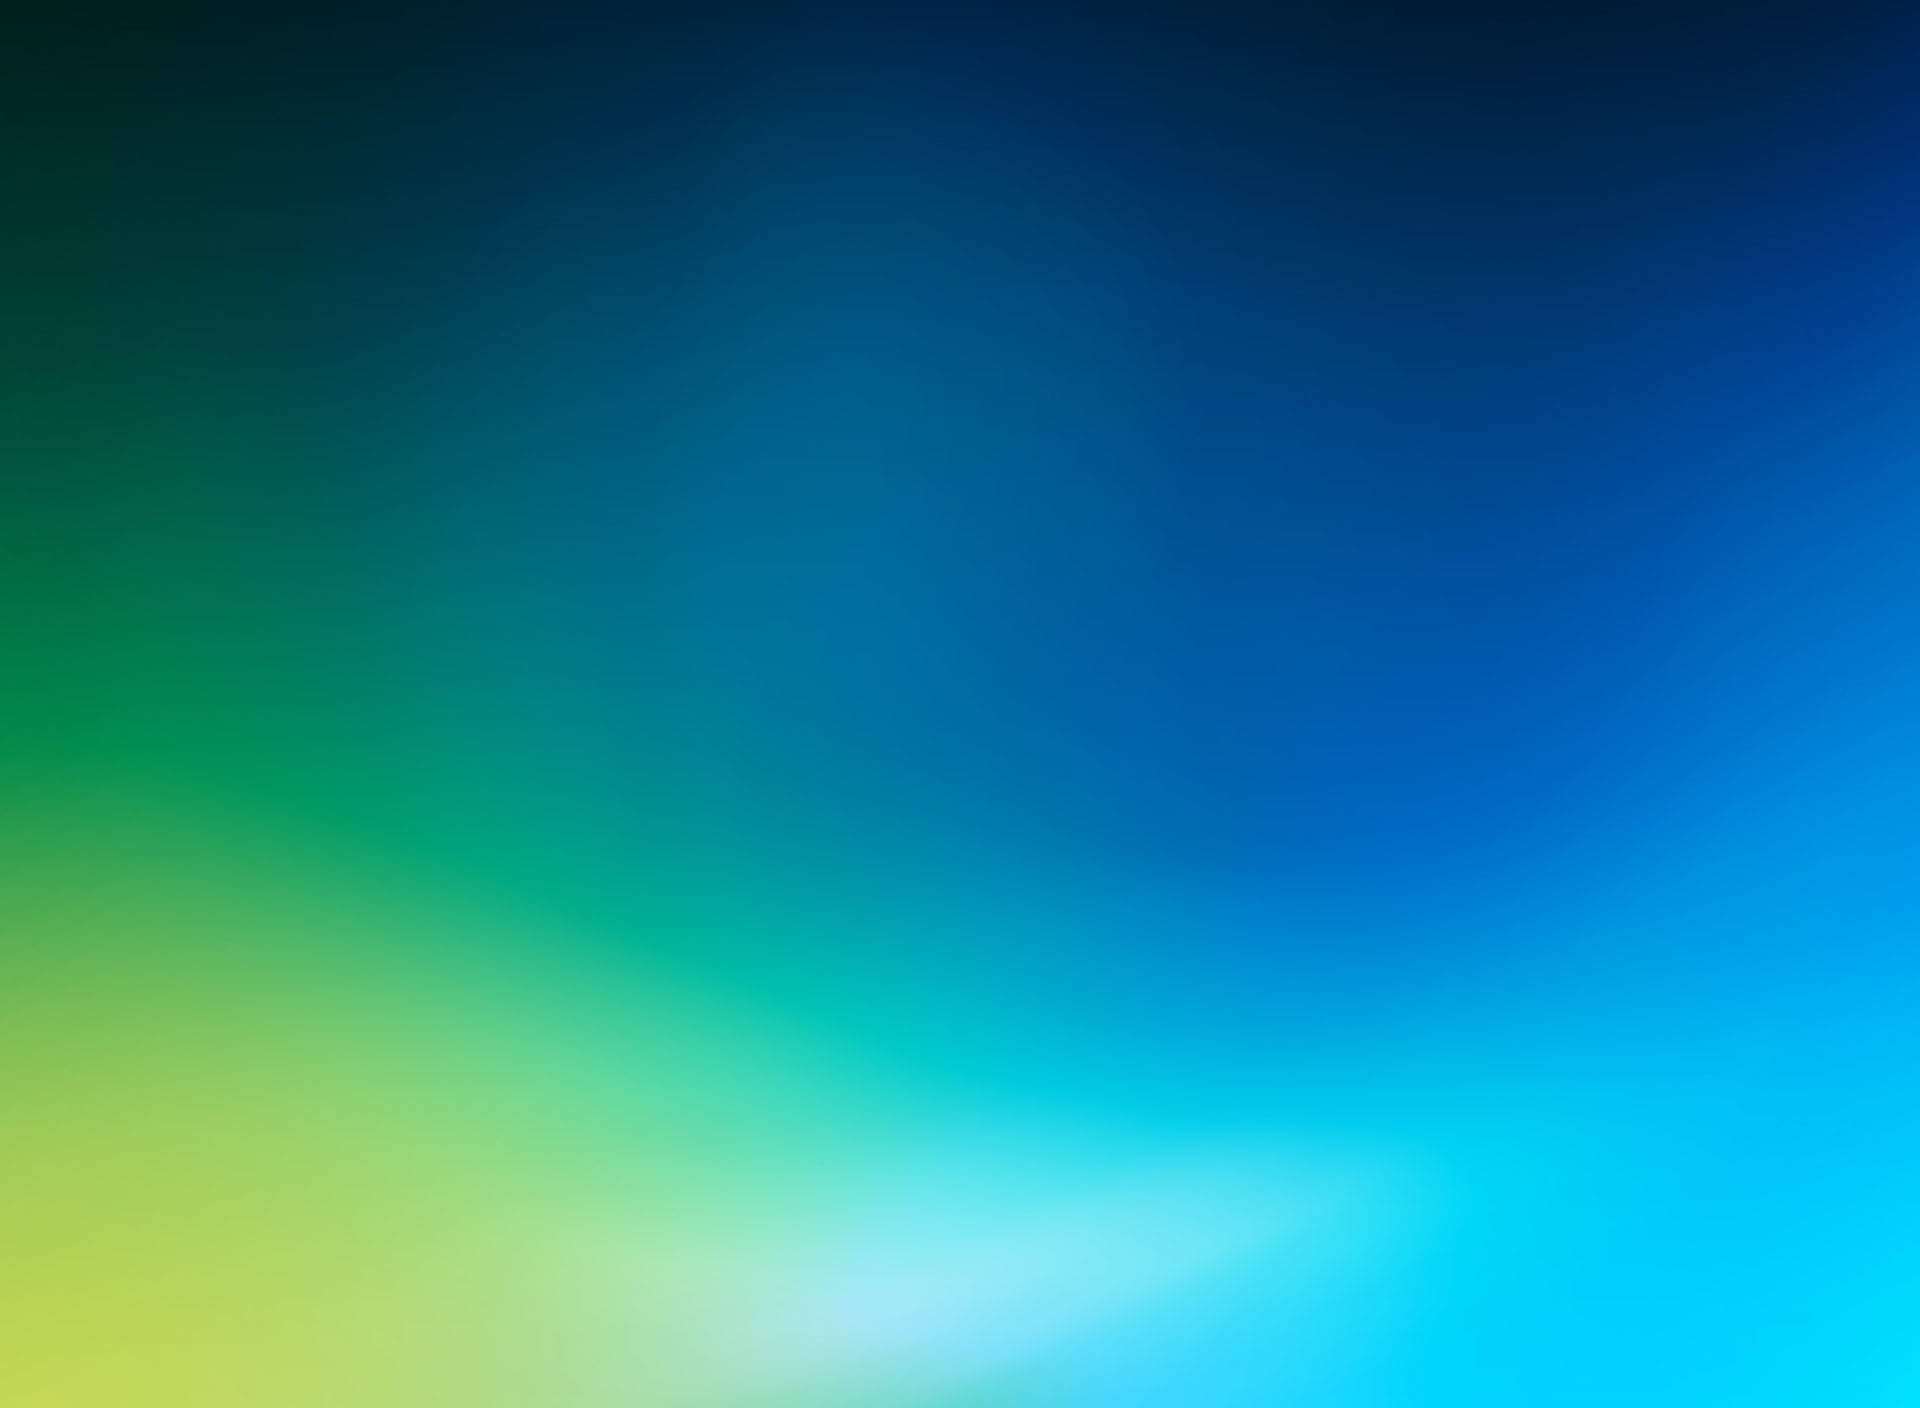 Simple Android Tablet Background